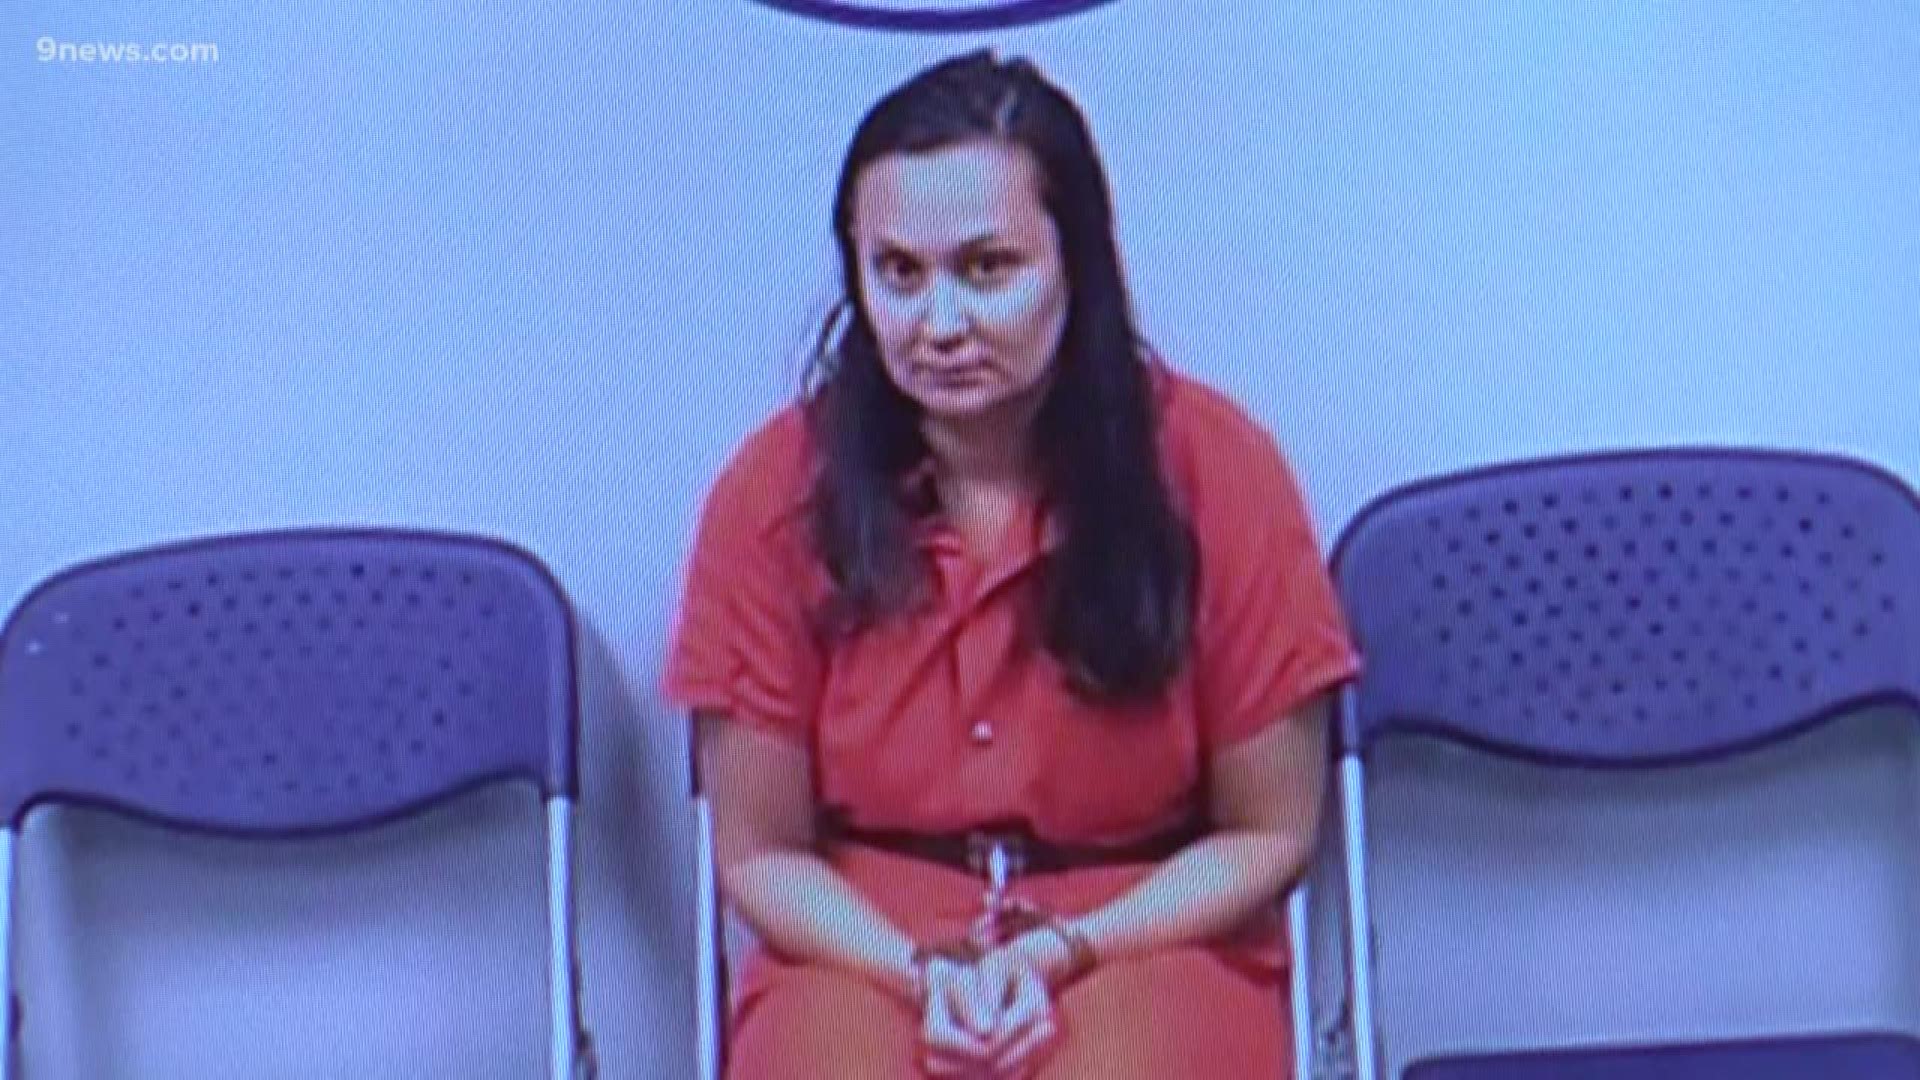 She appeared in court Tuesday morning in South Carolina, a day after she was arrested in connection with the death of Gannon Stauch, who remains missing.